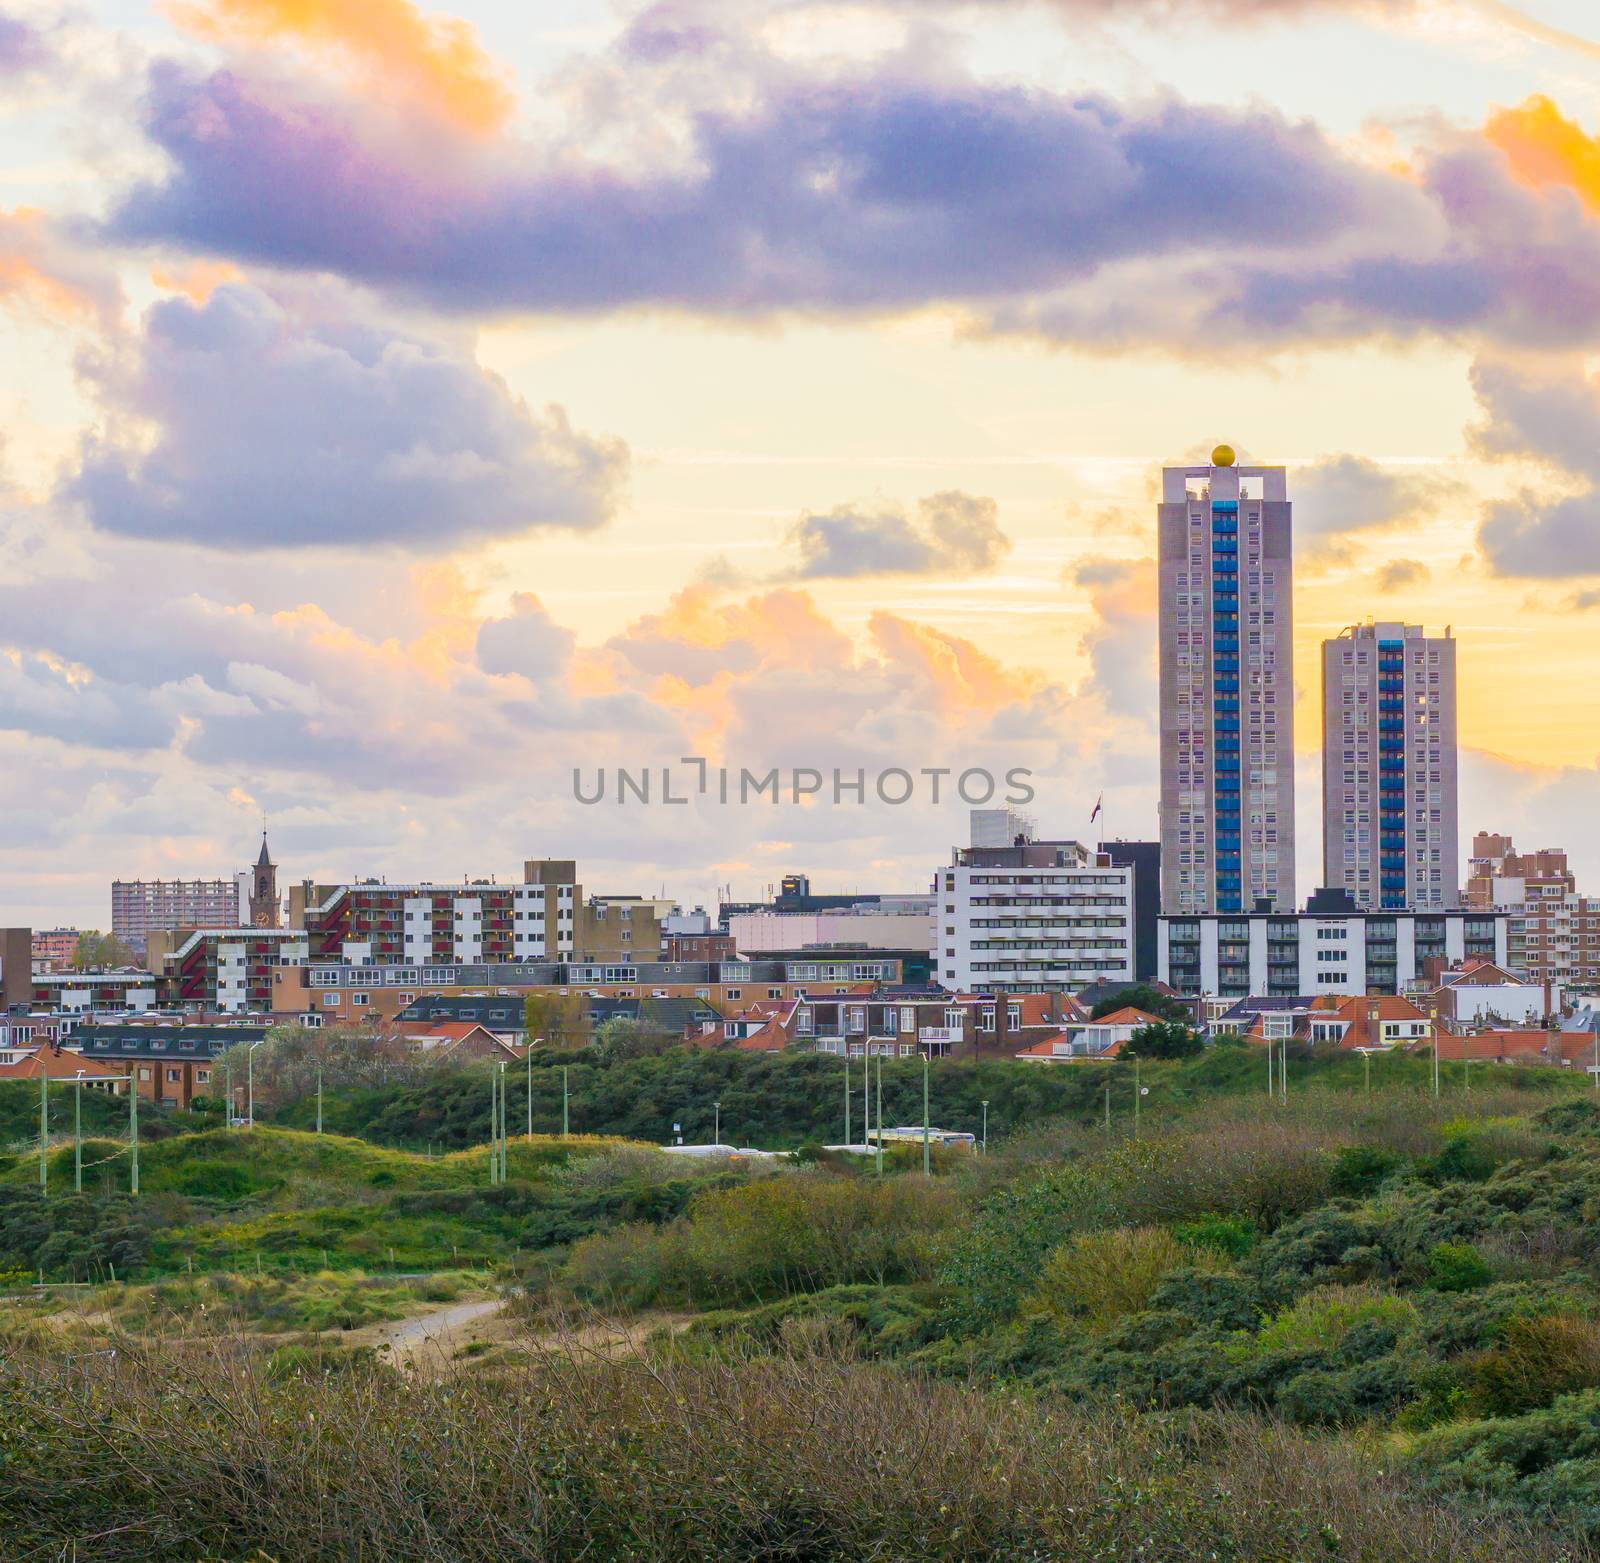 Popular and touristic location Scheveningen The netherlands a town near the beach at sunset view from the dunes on the buildings and skyscrapers by charlottebleijenberg